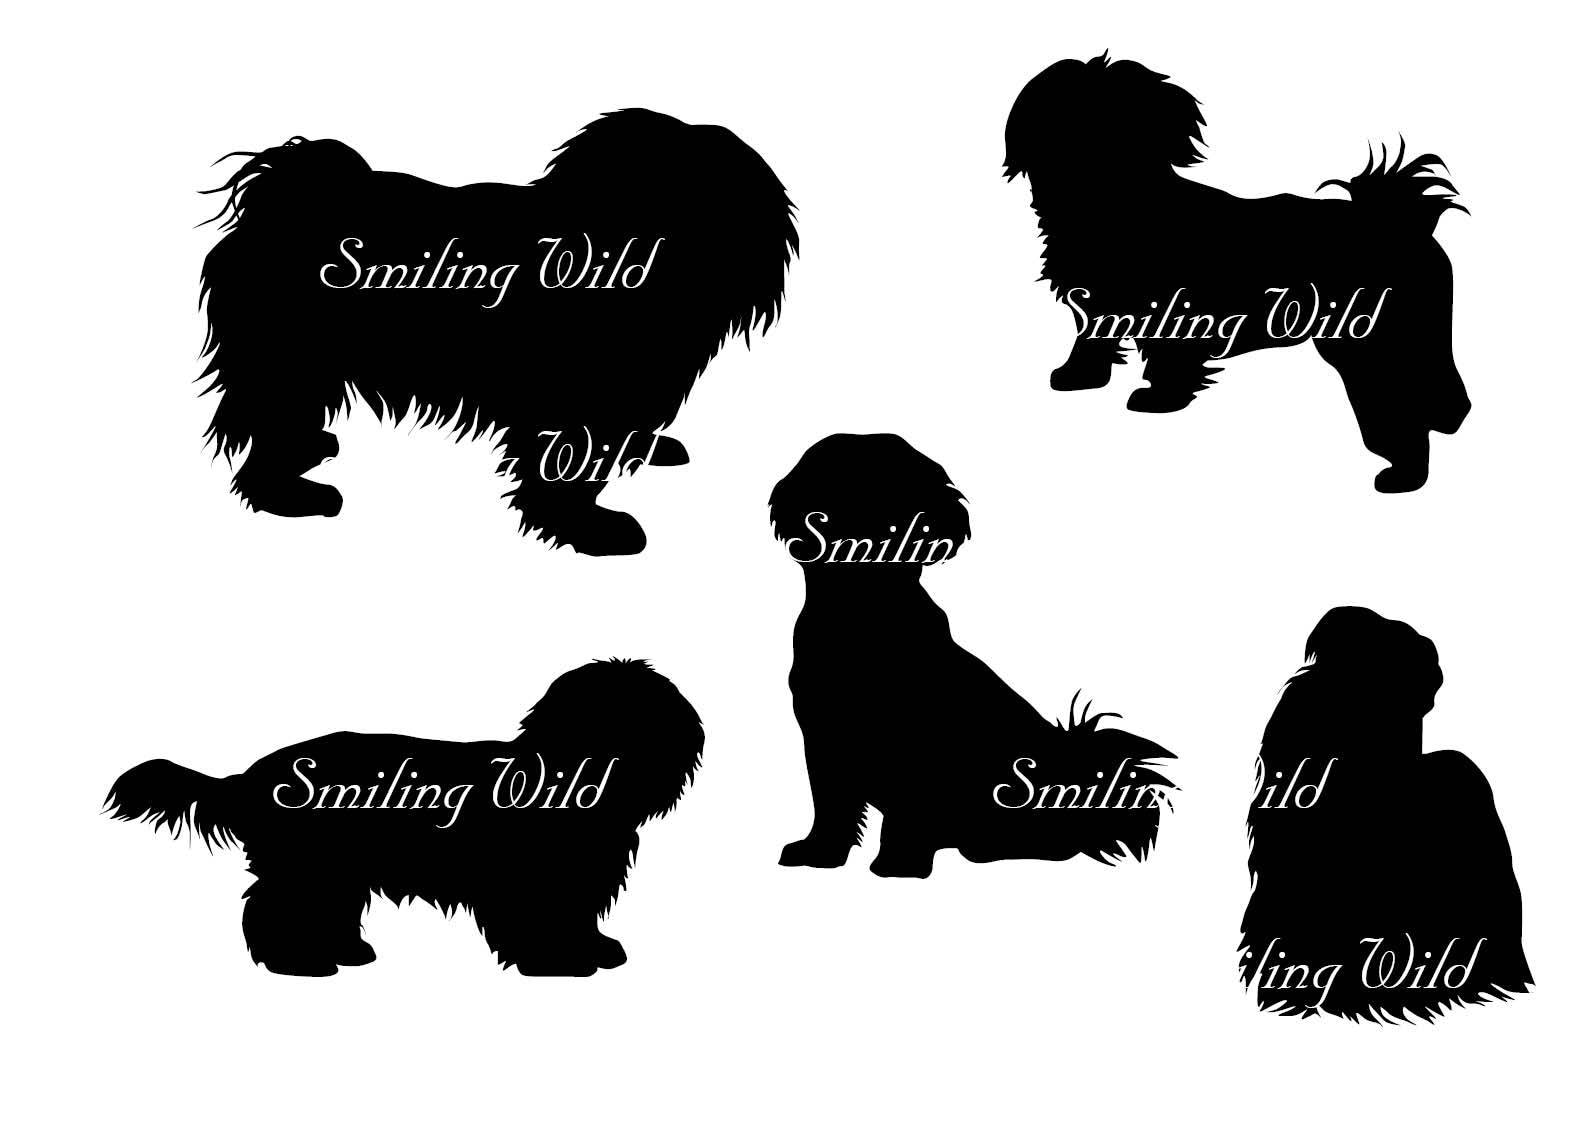 Shih Tzu silhouette svg clipart cut out dog vector graphic art | Etsy